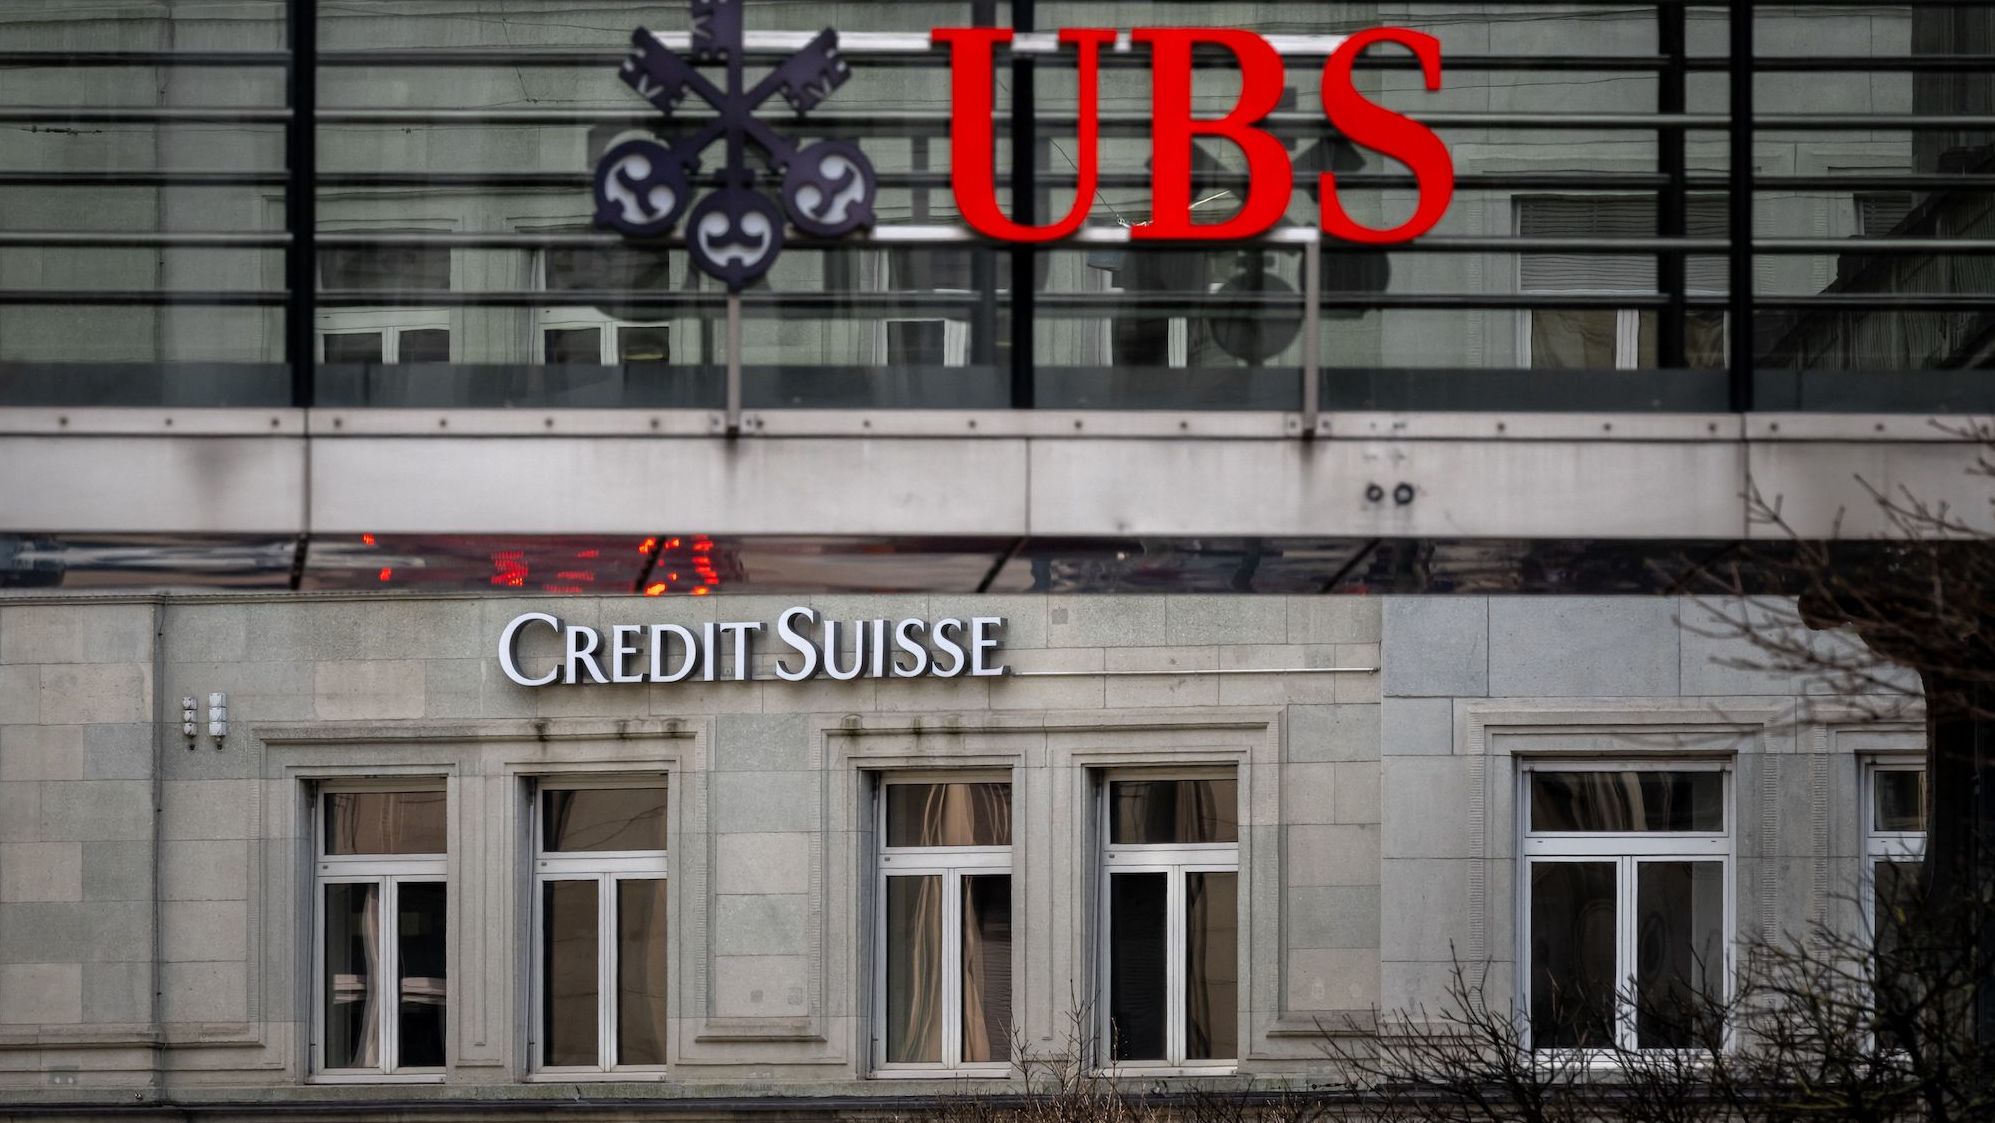 switzerlands-biggest-bank-ubs-agrees-to-take-over-troubled-credit-suisse-in-emergency-rescue-deal